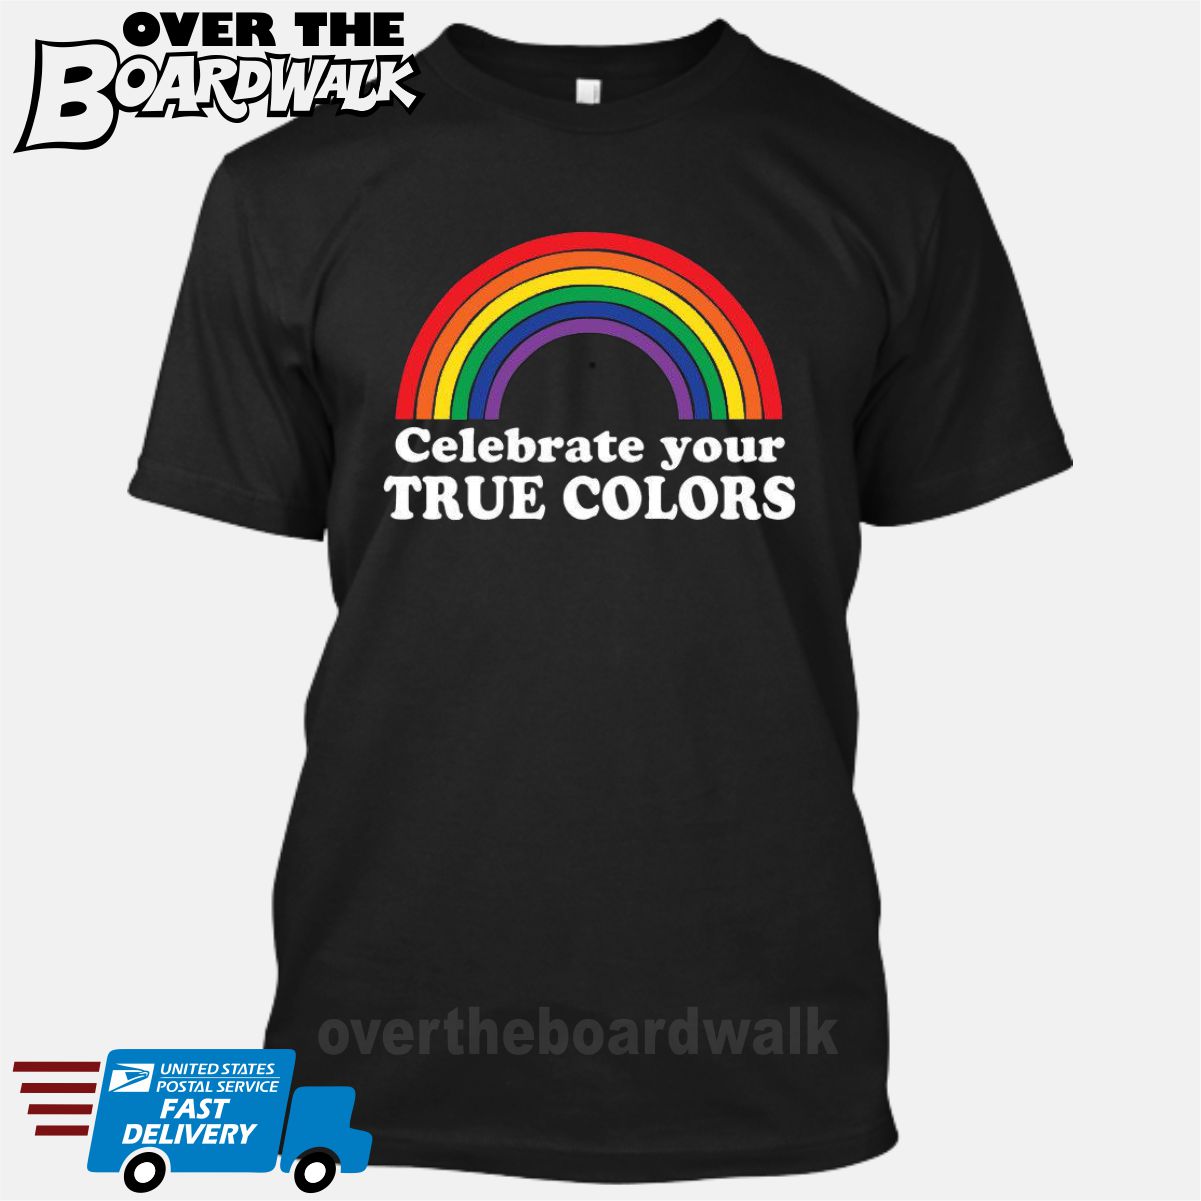 when did they start making gay pride shirts